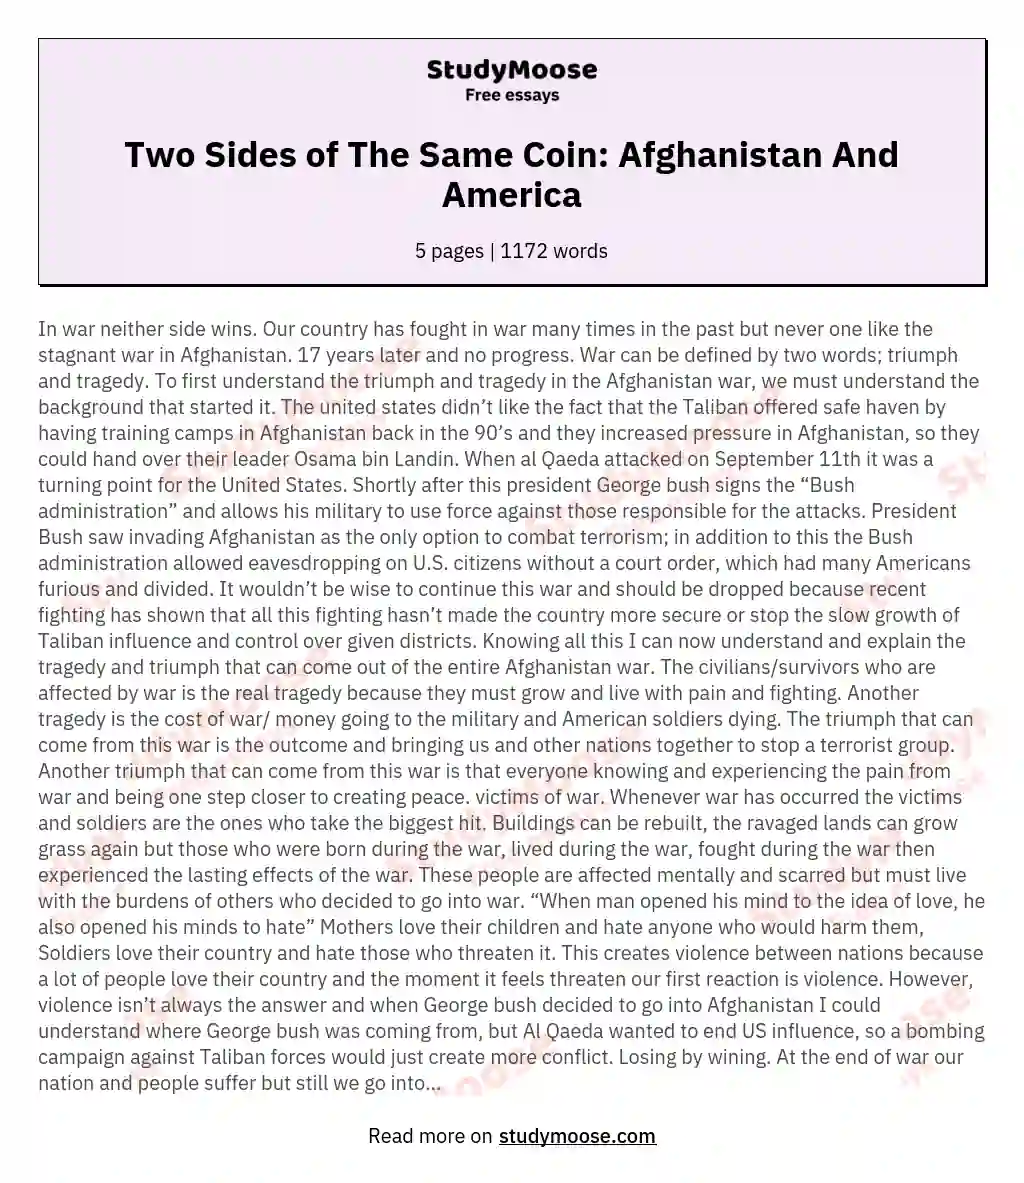 Two Sides of The Same Coin: Afghanistan And America essay